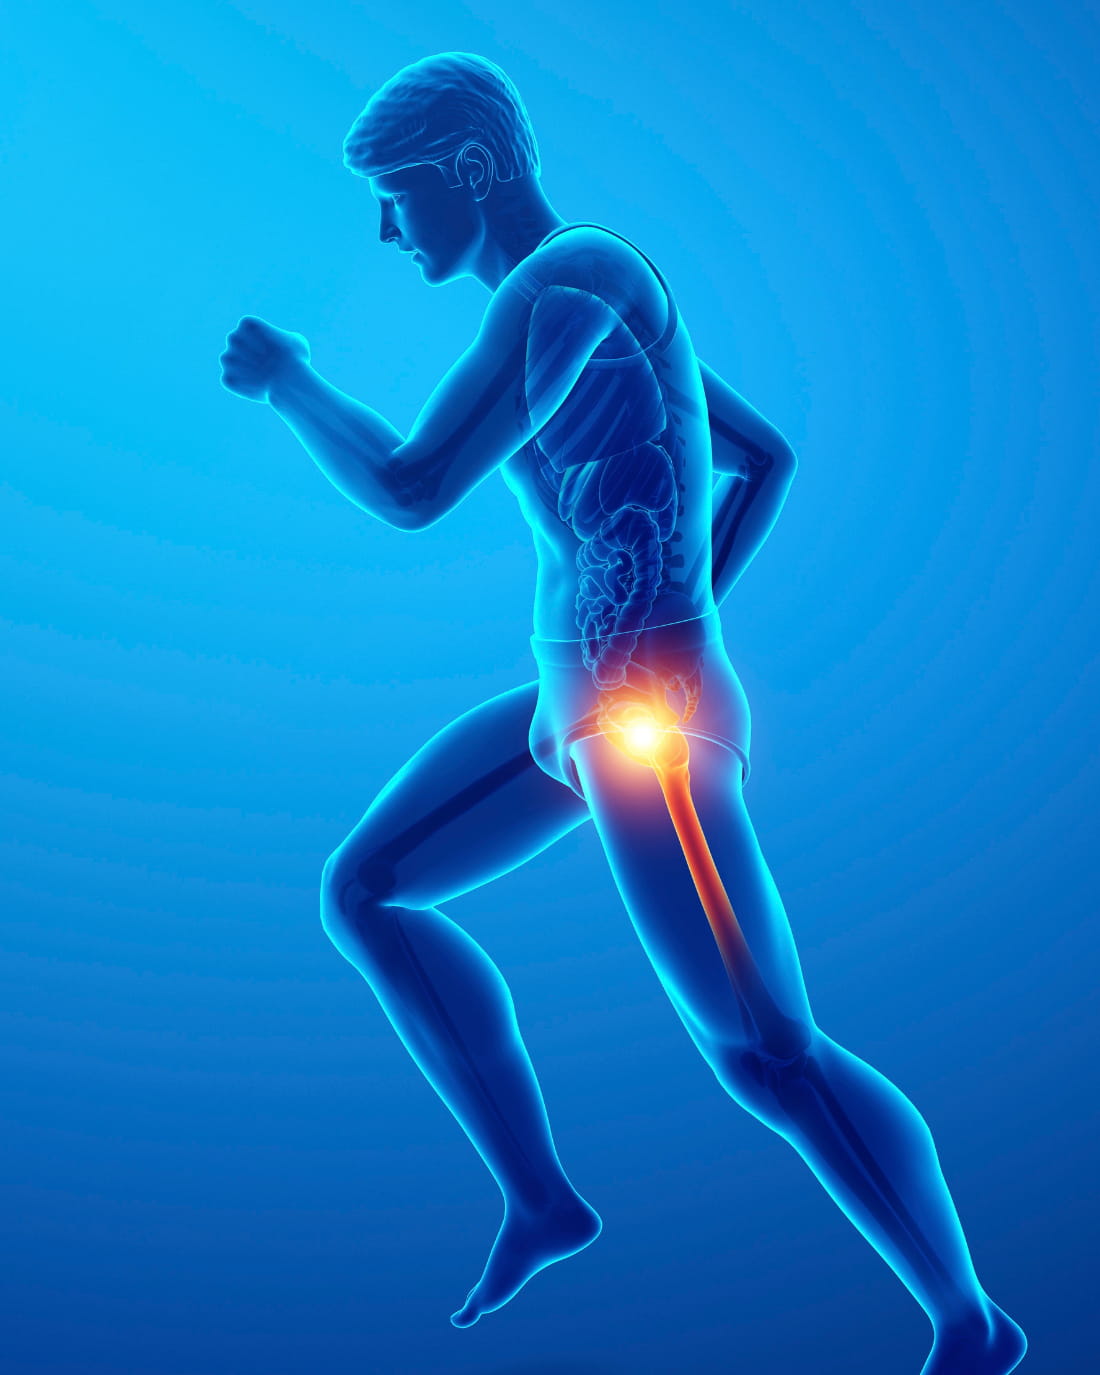 Illustration of a runner's anatomy with a highlighted, glowing hip joint, suggesting pain or stress in that area.